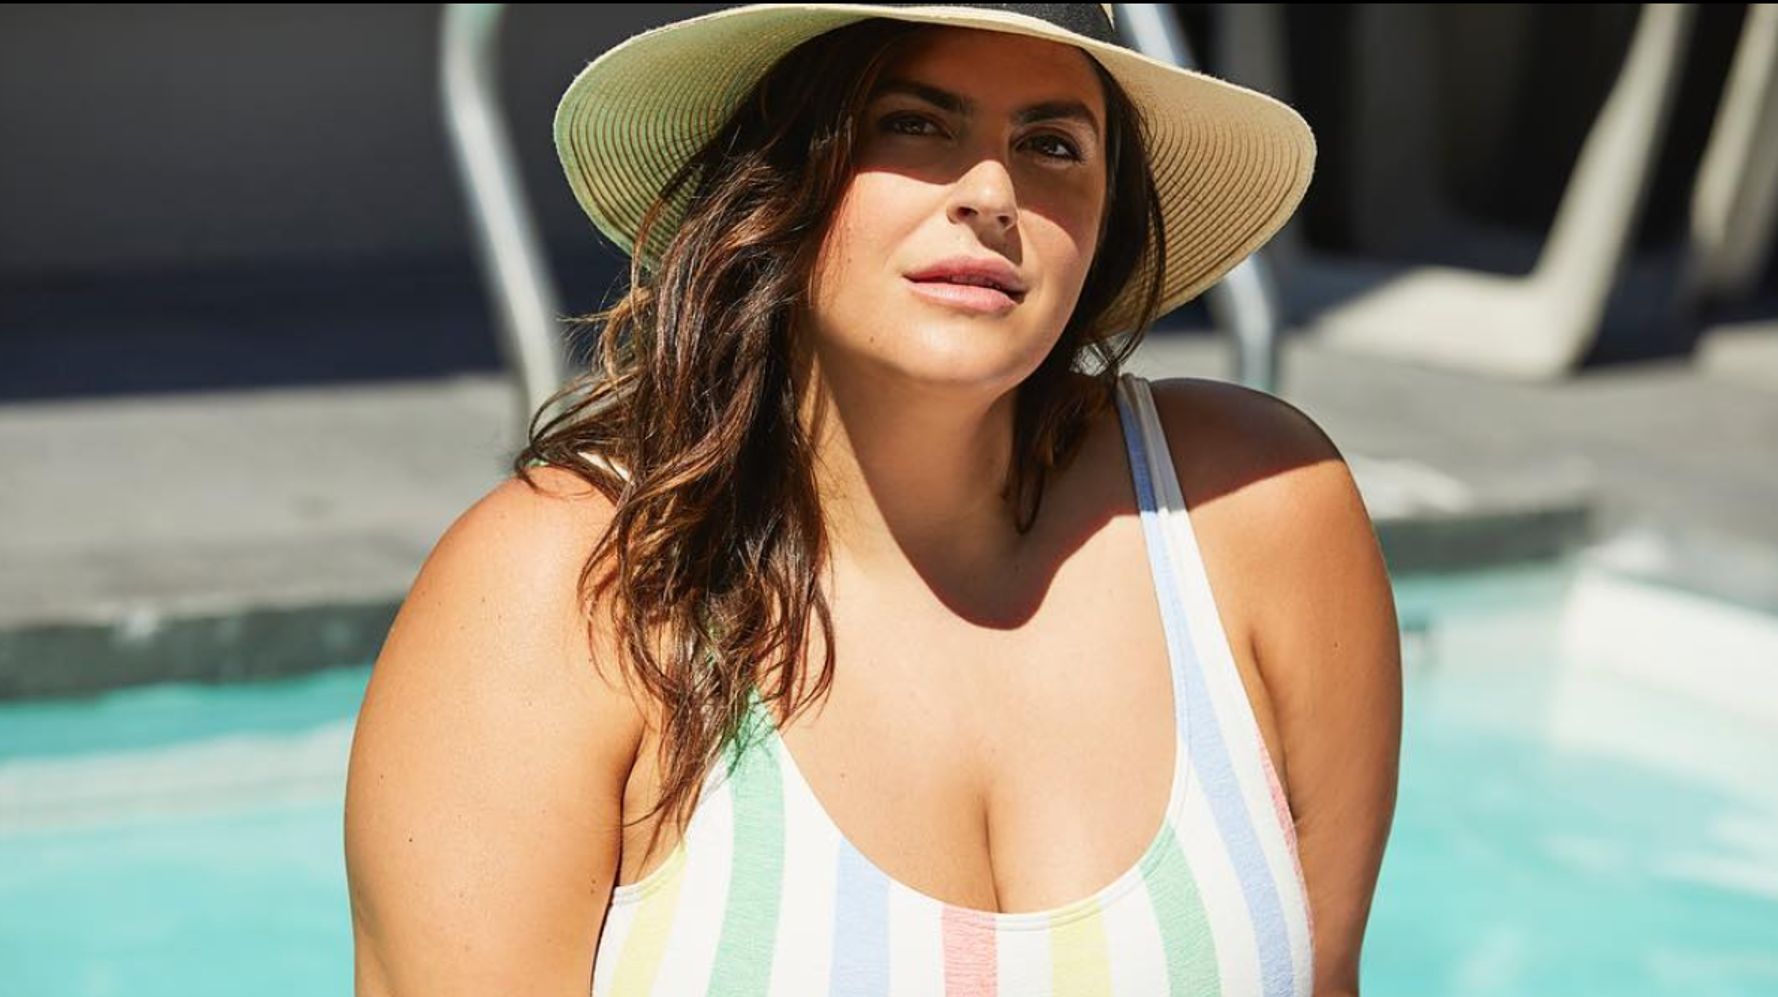 Blogger Katie Sturino Shares A Very Important Point About Clothing Sizes  And Happiness | HuffPost HuffPost Personal